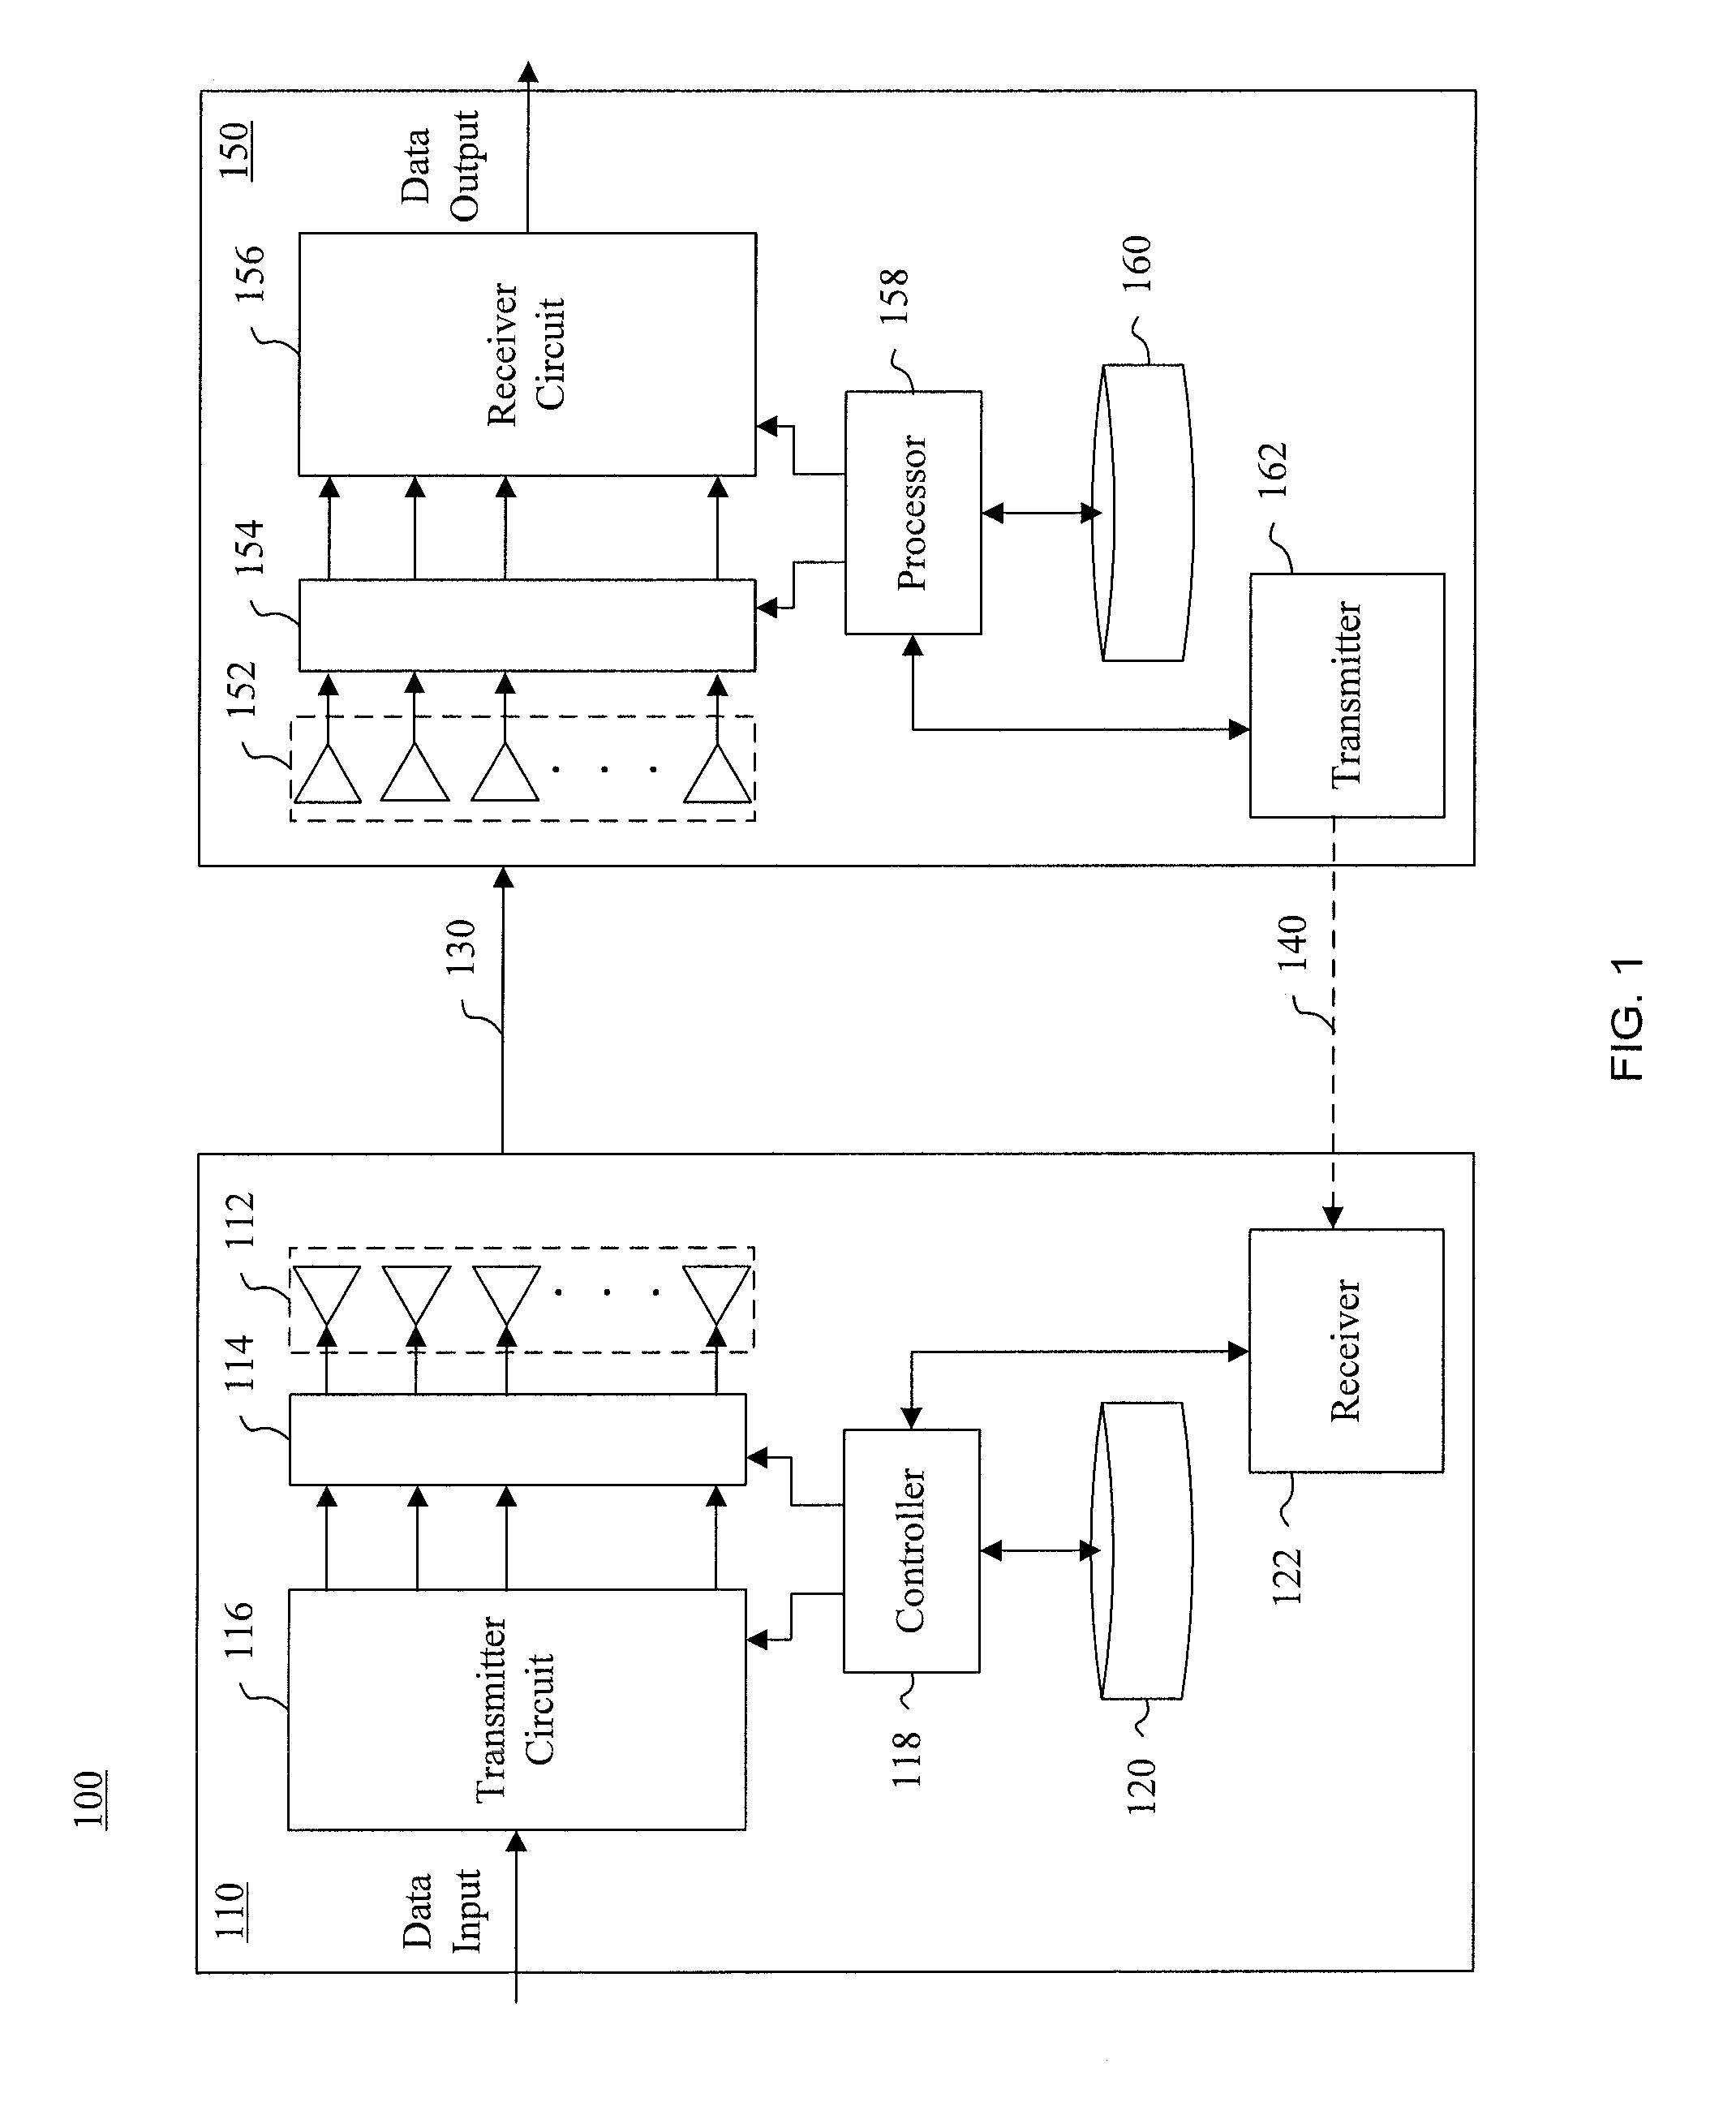 Systems and methods for prioritizing beams to enable efficient determination of suitable communication links